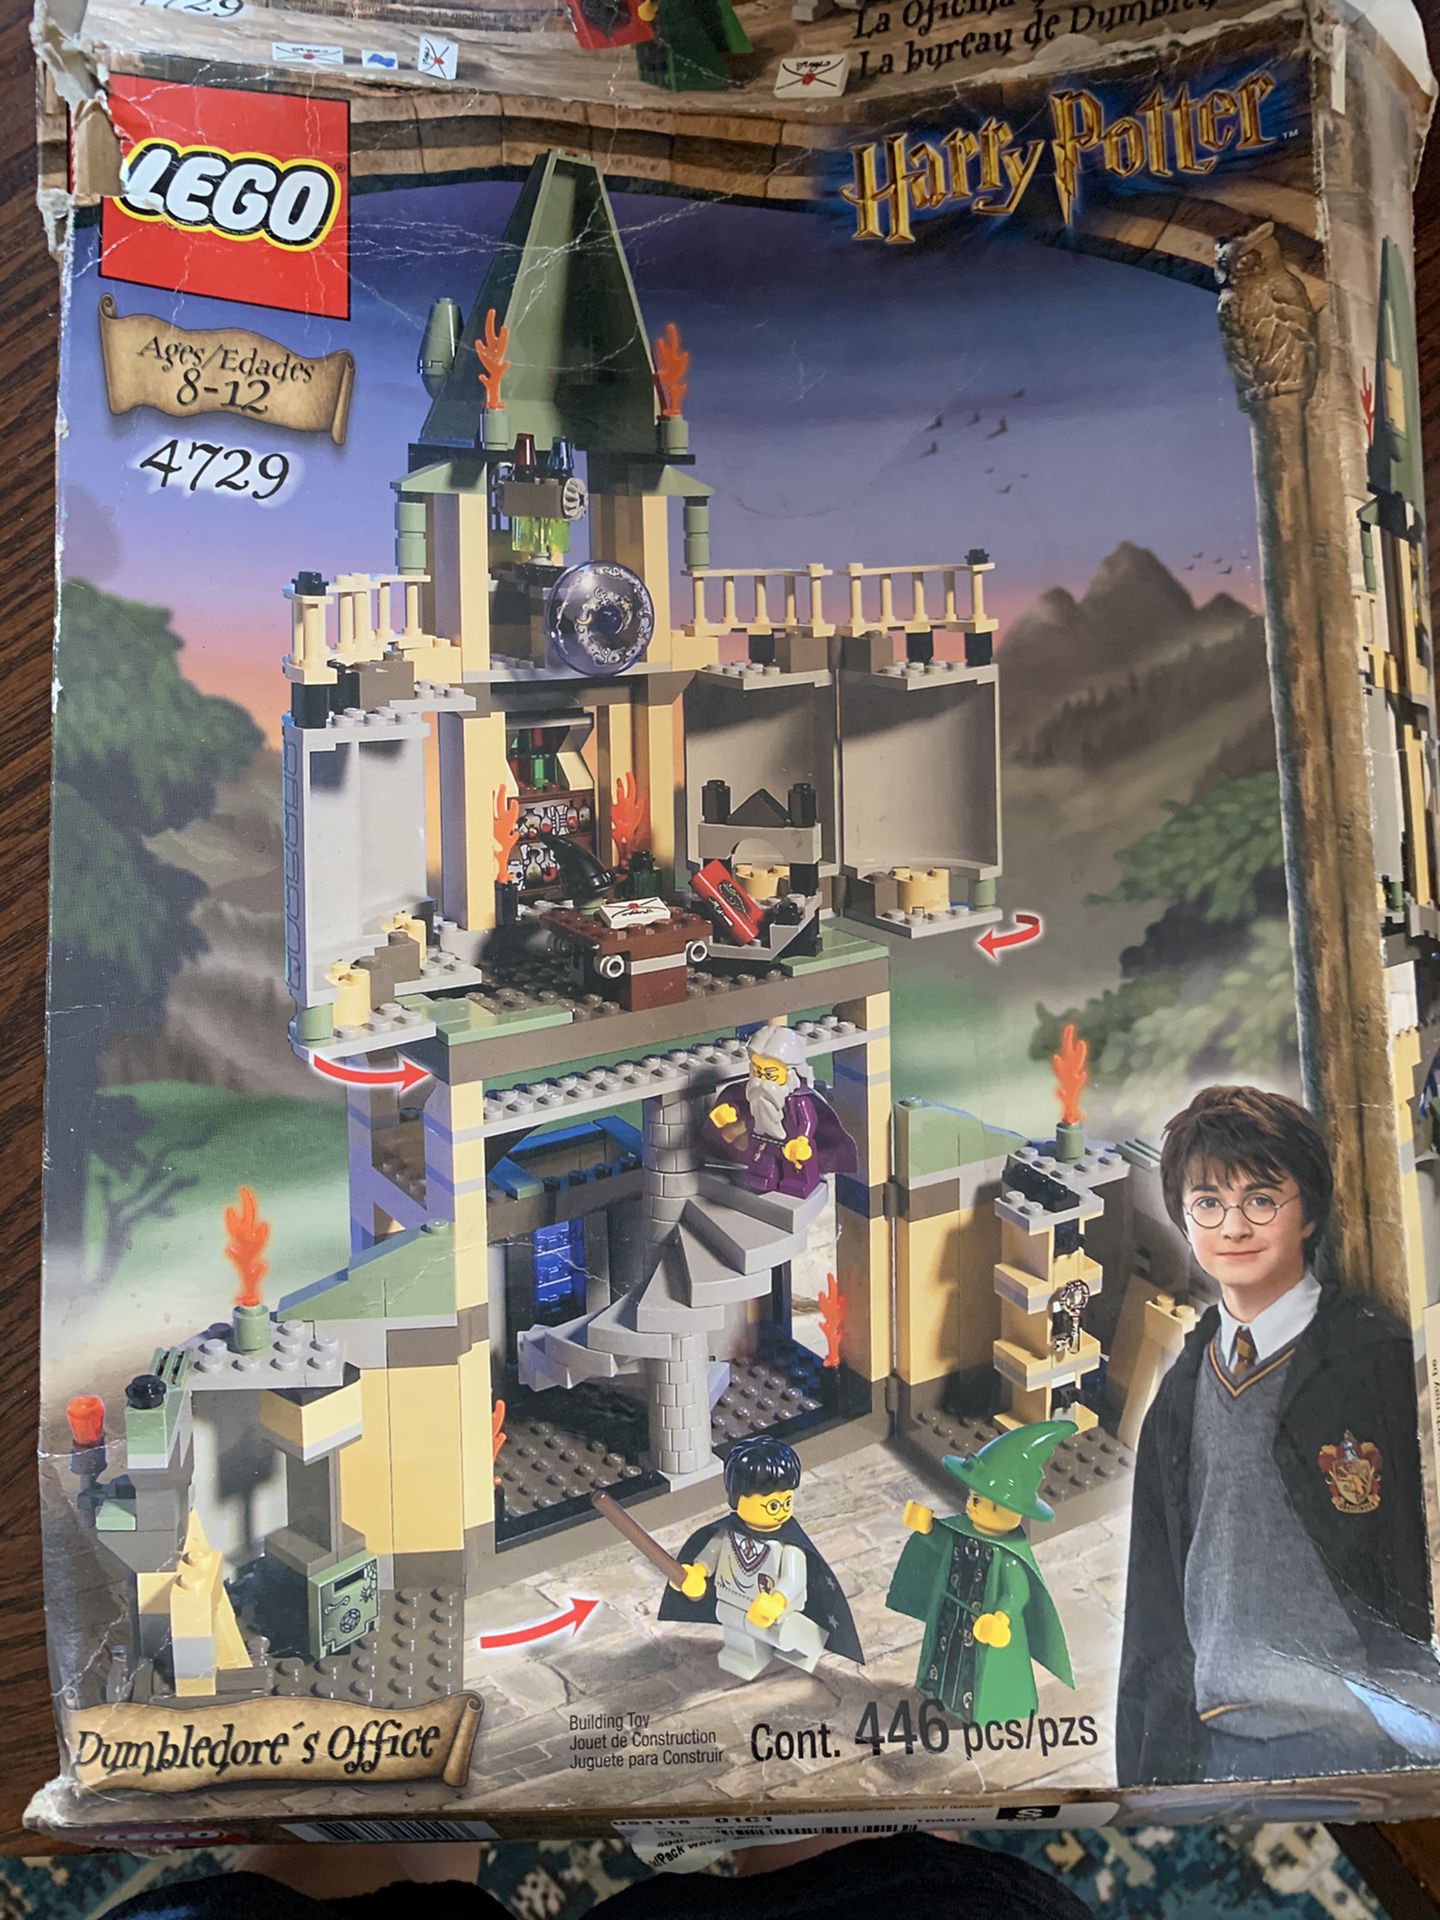 Lego Harry Potter Dumbledore’s Office #4729. Box And Instructions Included, Partially Put Together.  